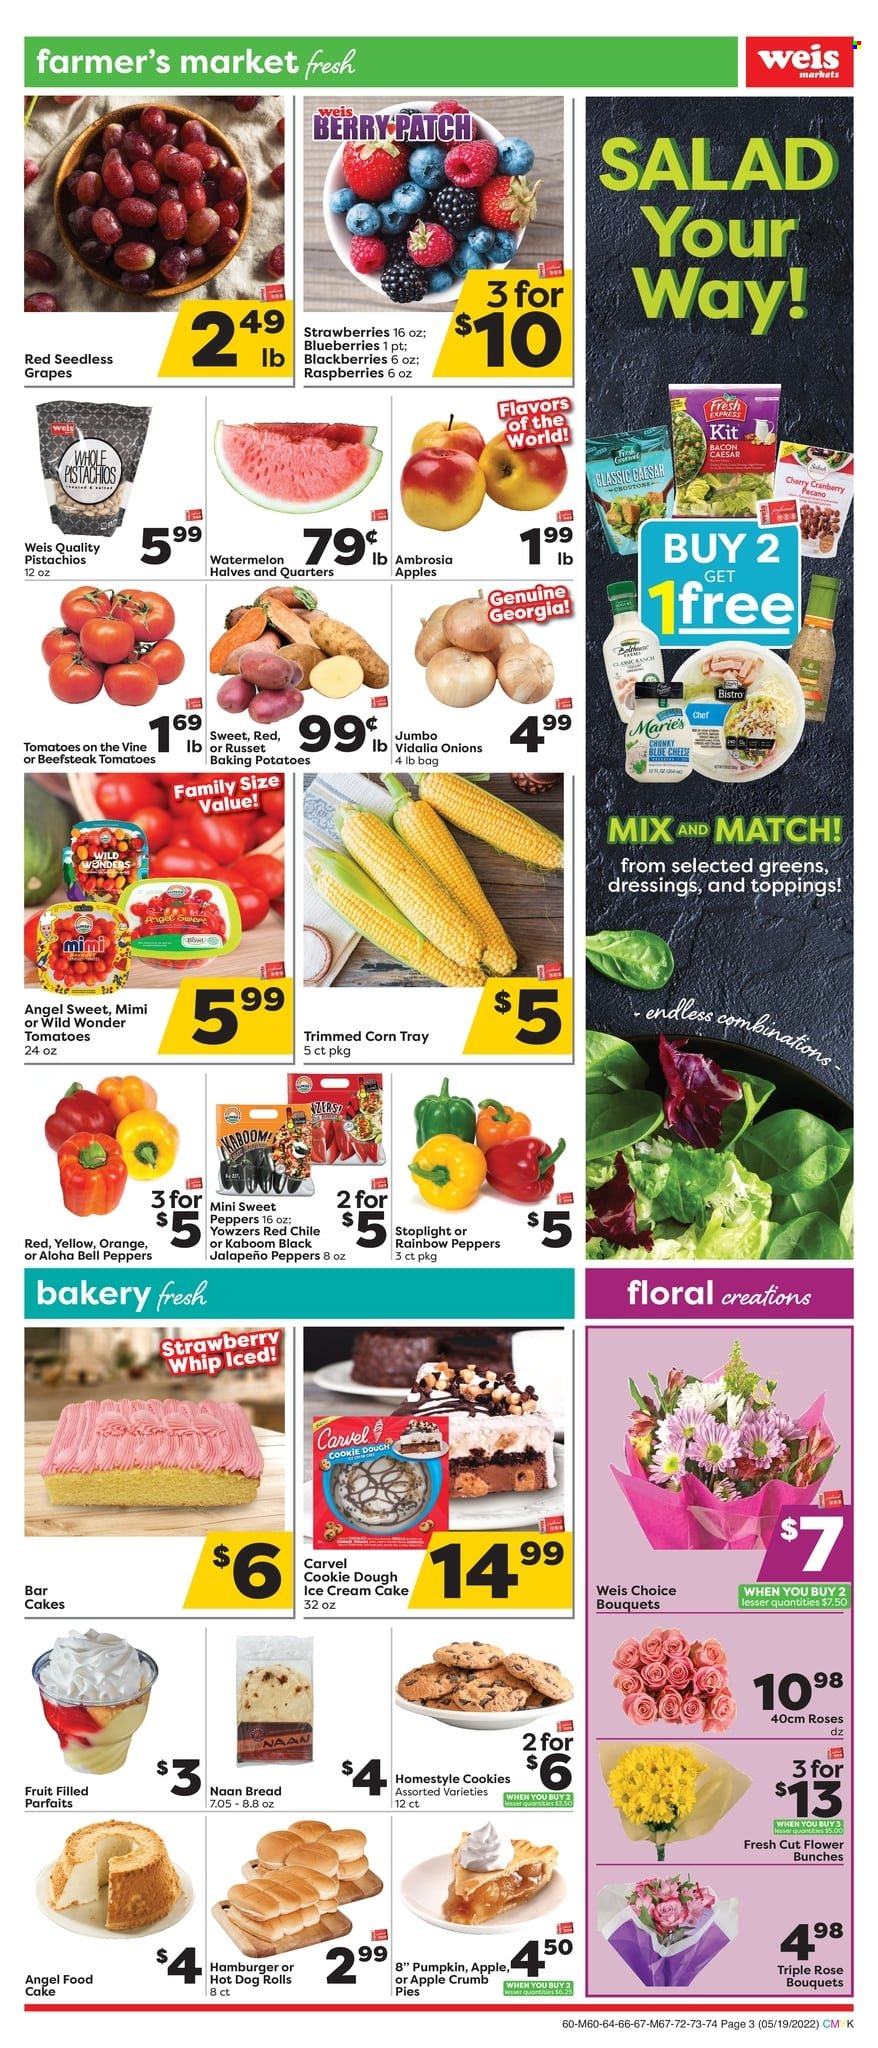 thumbnail - Weis Flyer - 05/19/2022 - 06/22/2022 - Sales products - bread, cake, Angel Food, bell peppers, corn, russet potatoes, potatoes, onion, jalapeño, blackberries, blueberries, grapes, seedless grapes, strawberries, watermelon, hamburger, hot dog, ice cream, cookie dough, cookies, pistachios, wine, rosé wine, tray, bunches, bouquet, rose. Page 3.